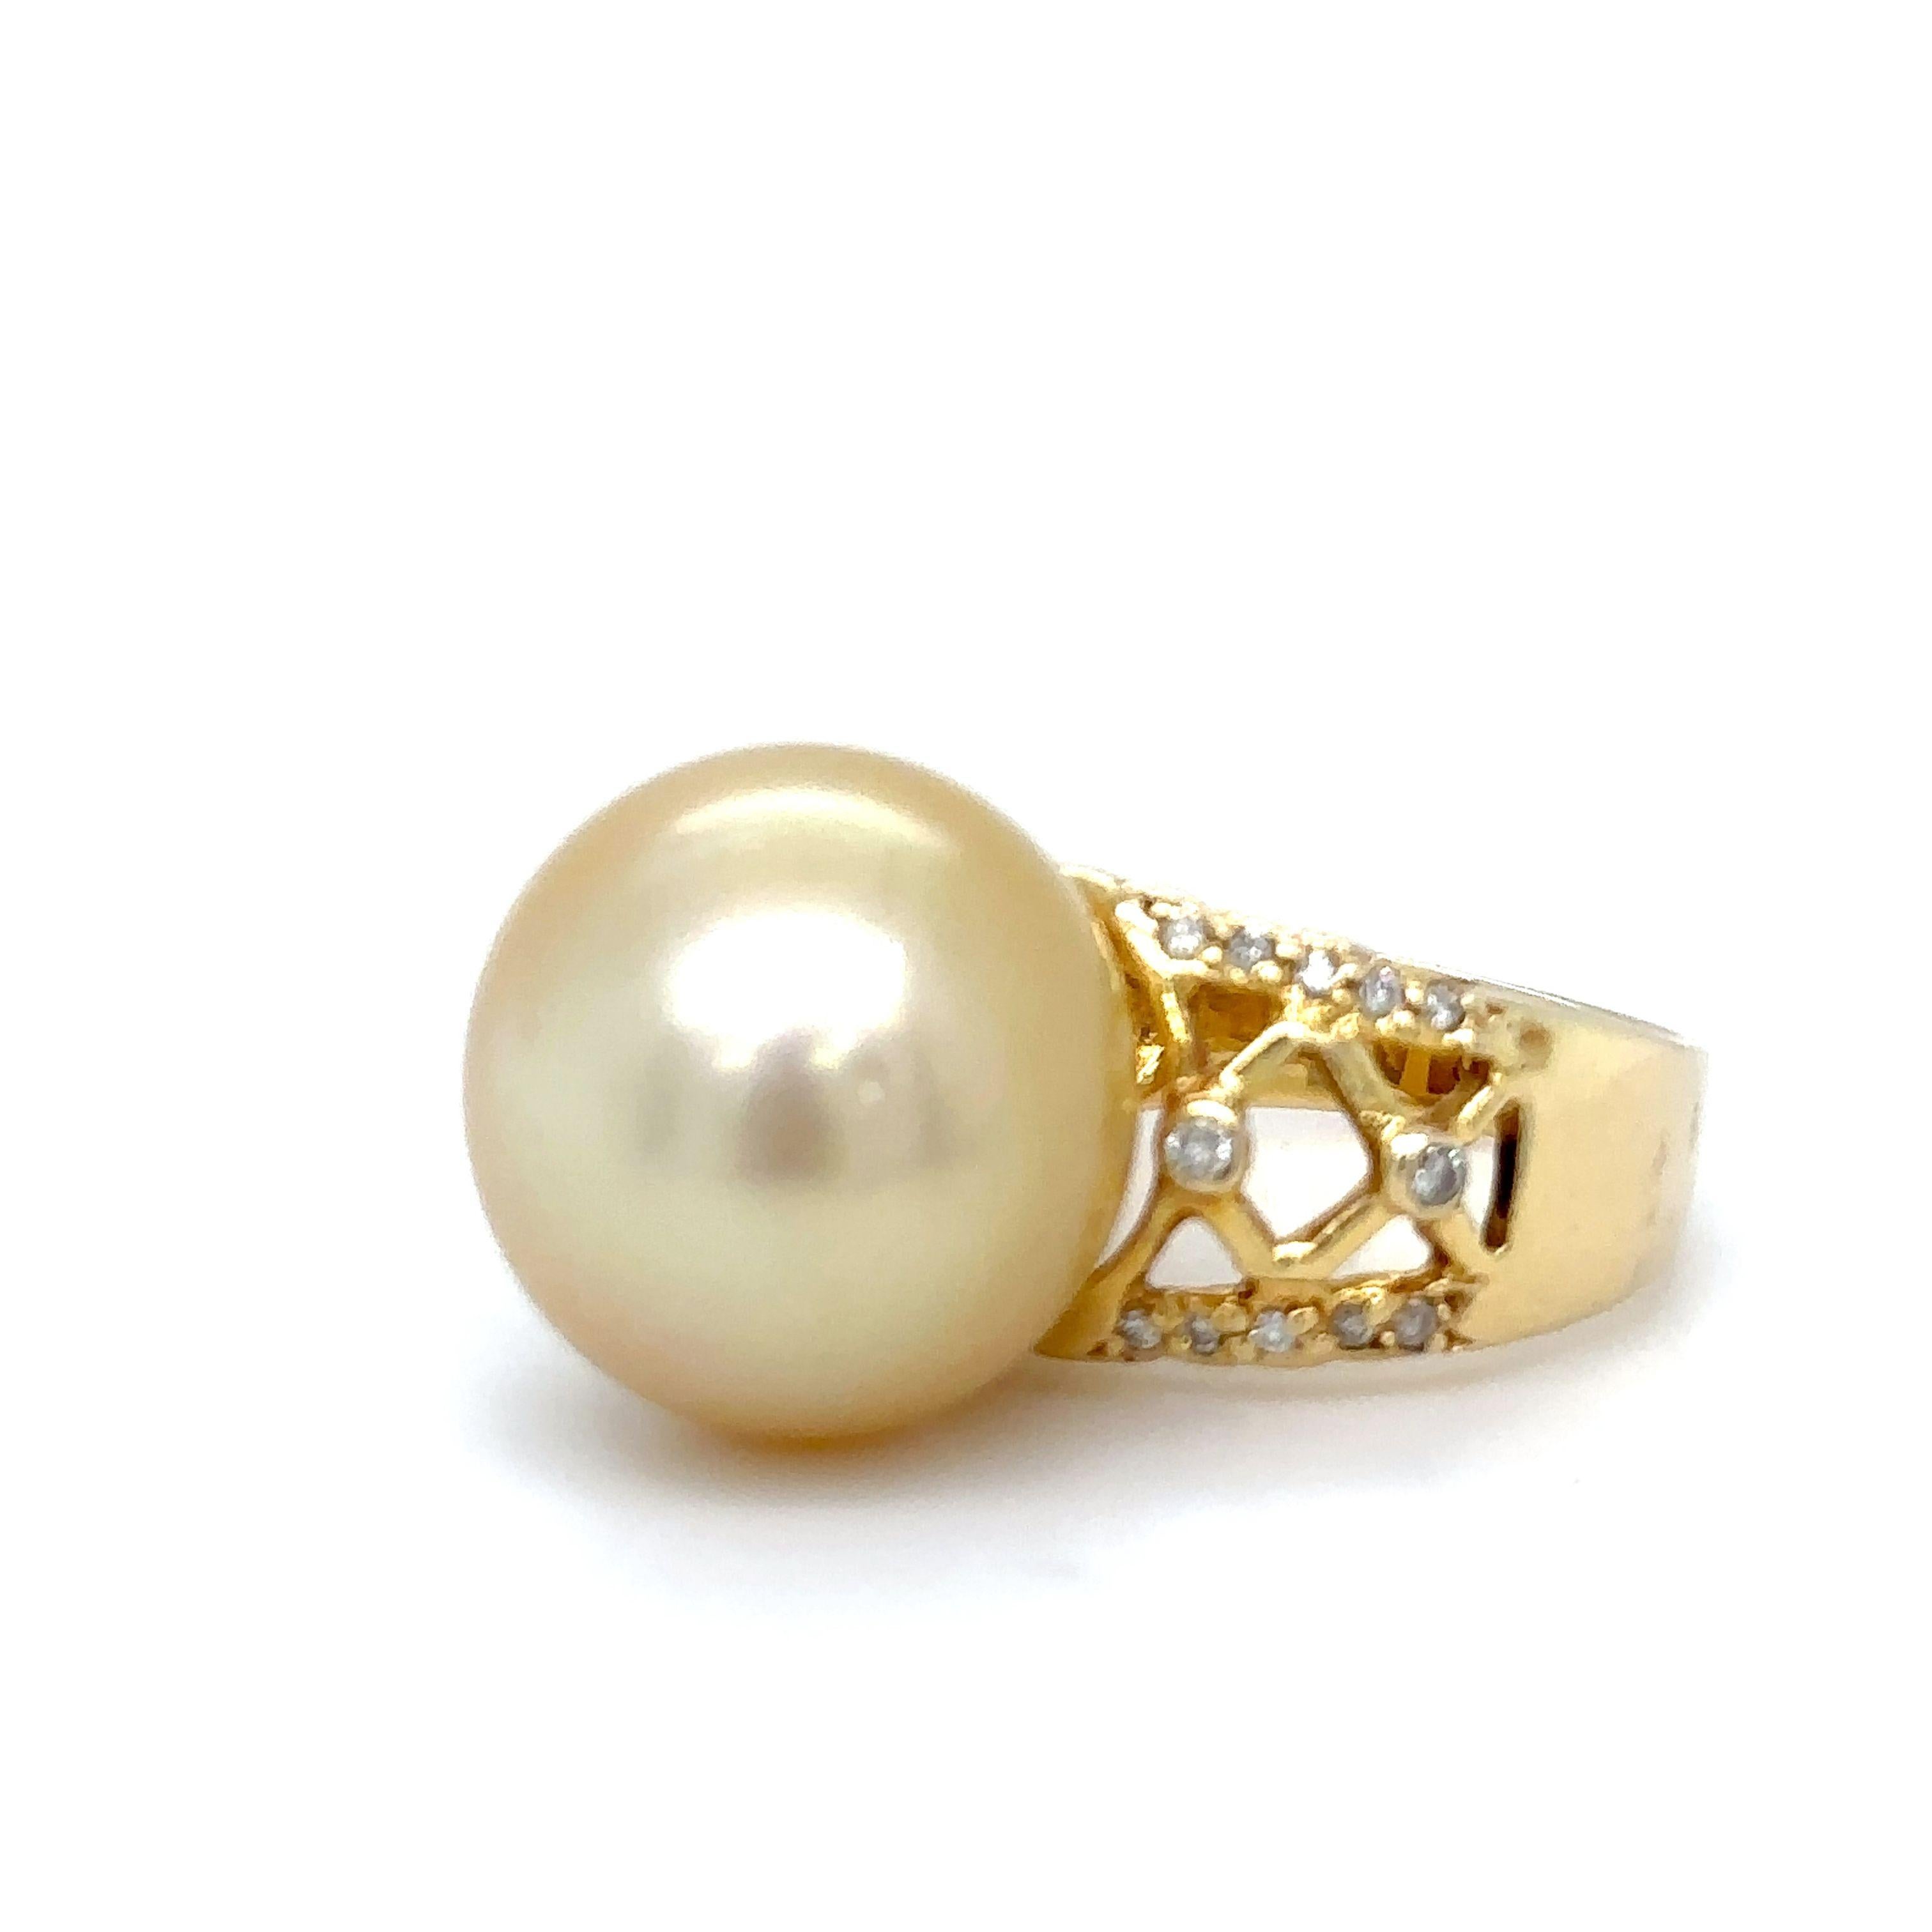 A Pearl and Diamond Ring, with a 15.2mm South Sea cultured pearl and 24 round brilliant cut diamonds on the shoulders and set in 18ct Yellow Gold.

Pearl size: 15.2mm, Shape: Semi-round,

Colour: Light Golden, Lustre: Medium, Surface: